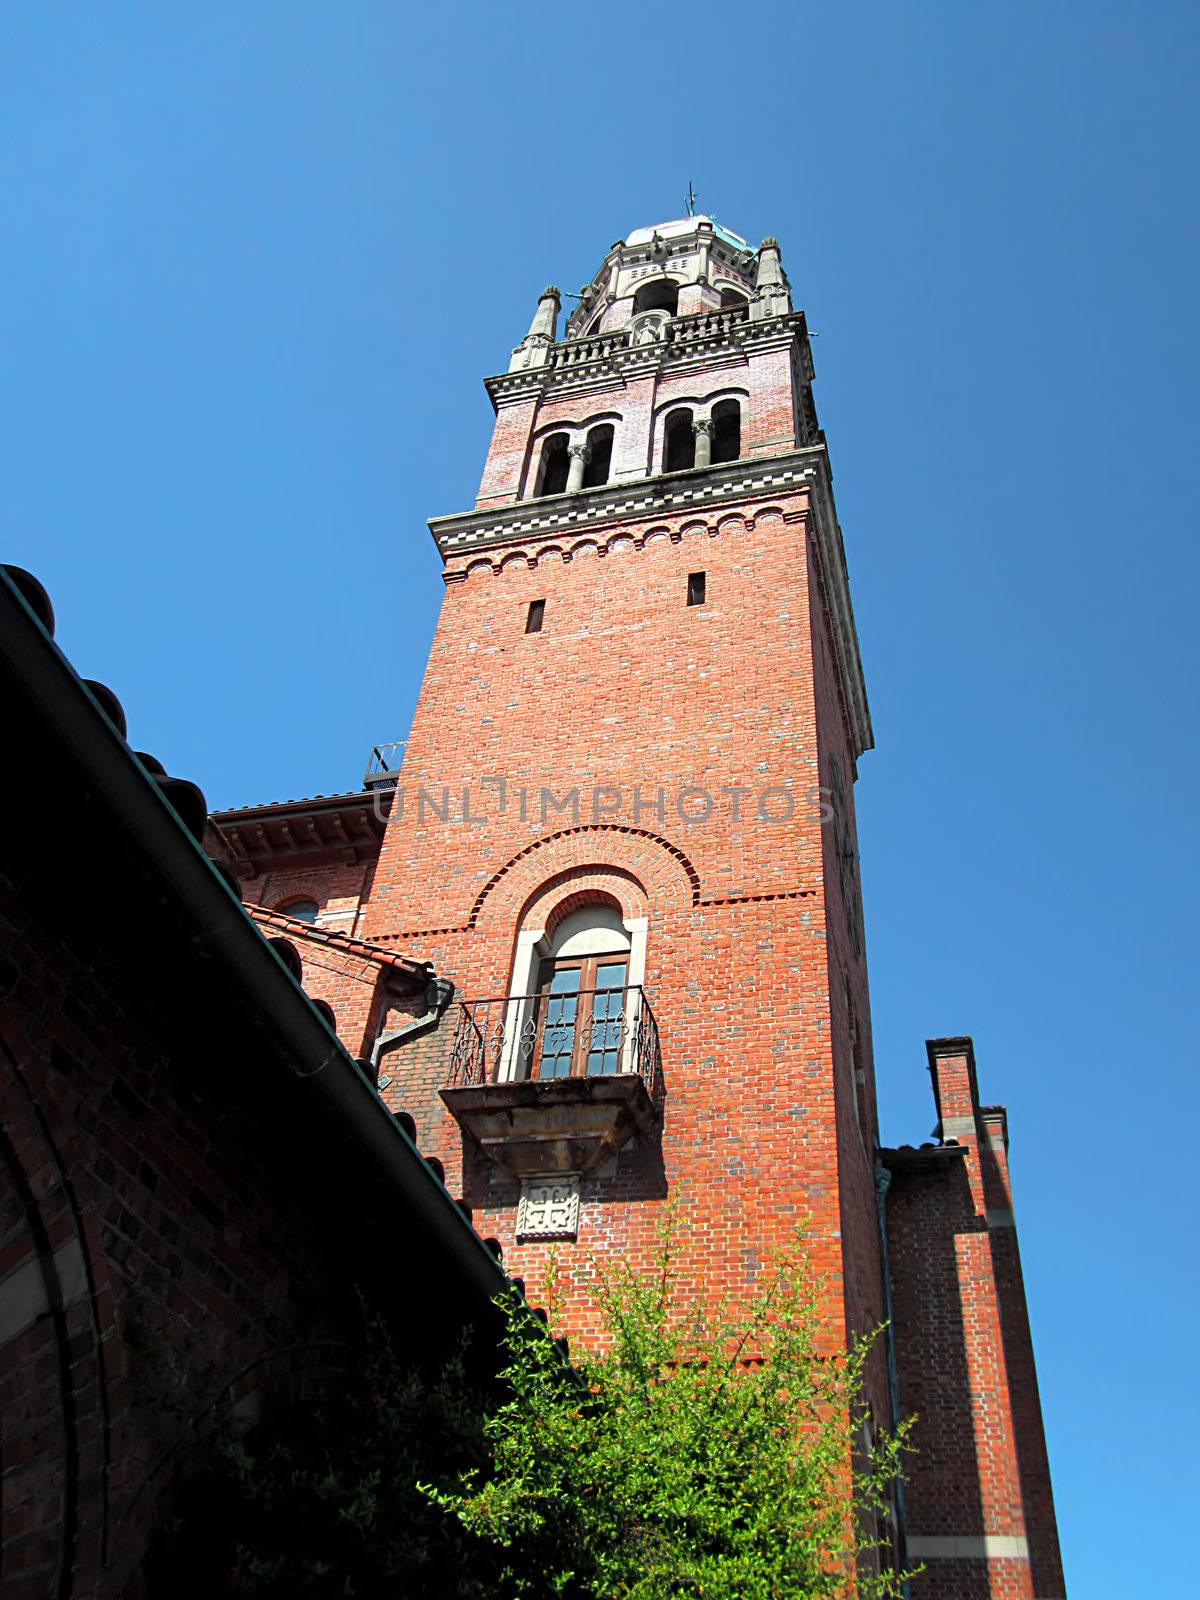 A photograph of a church bell tower detailing its unique architectural design.